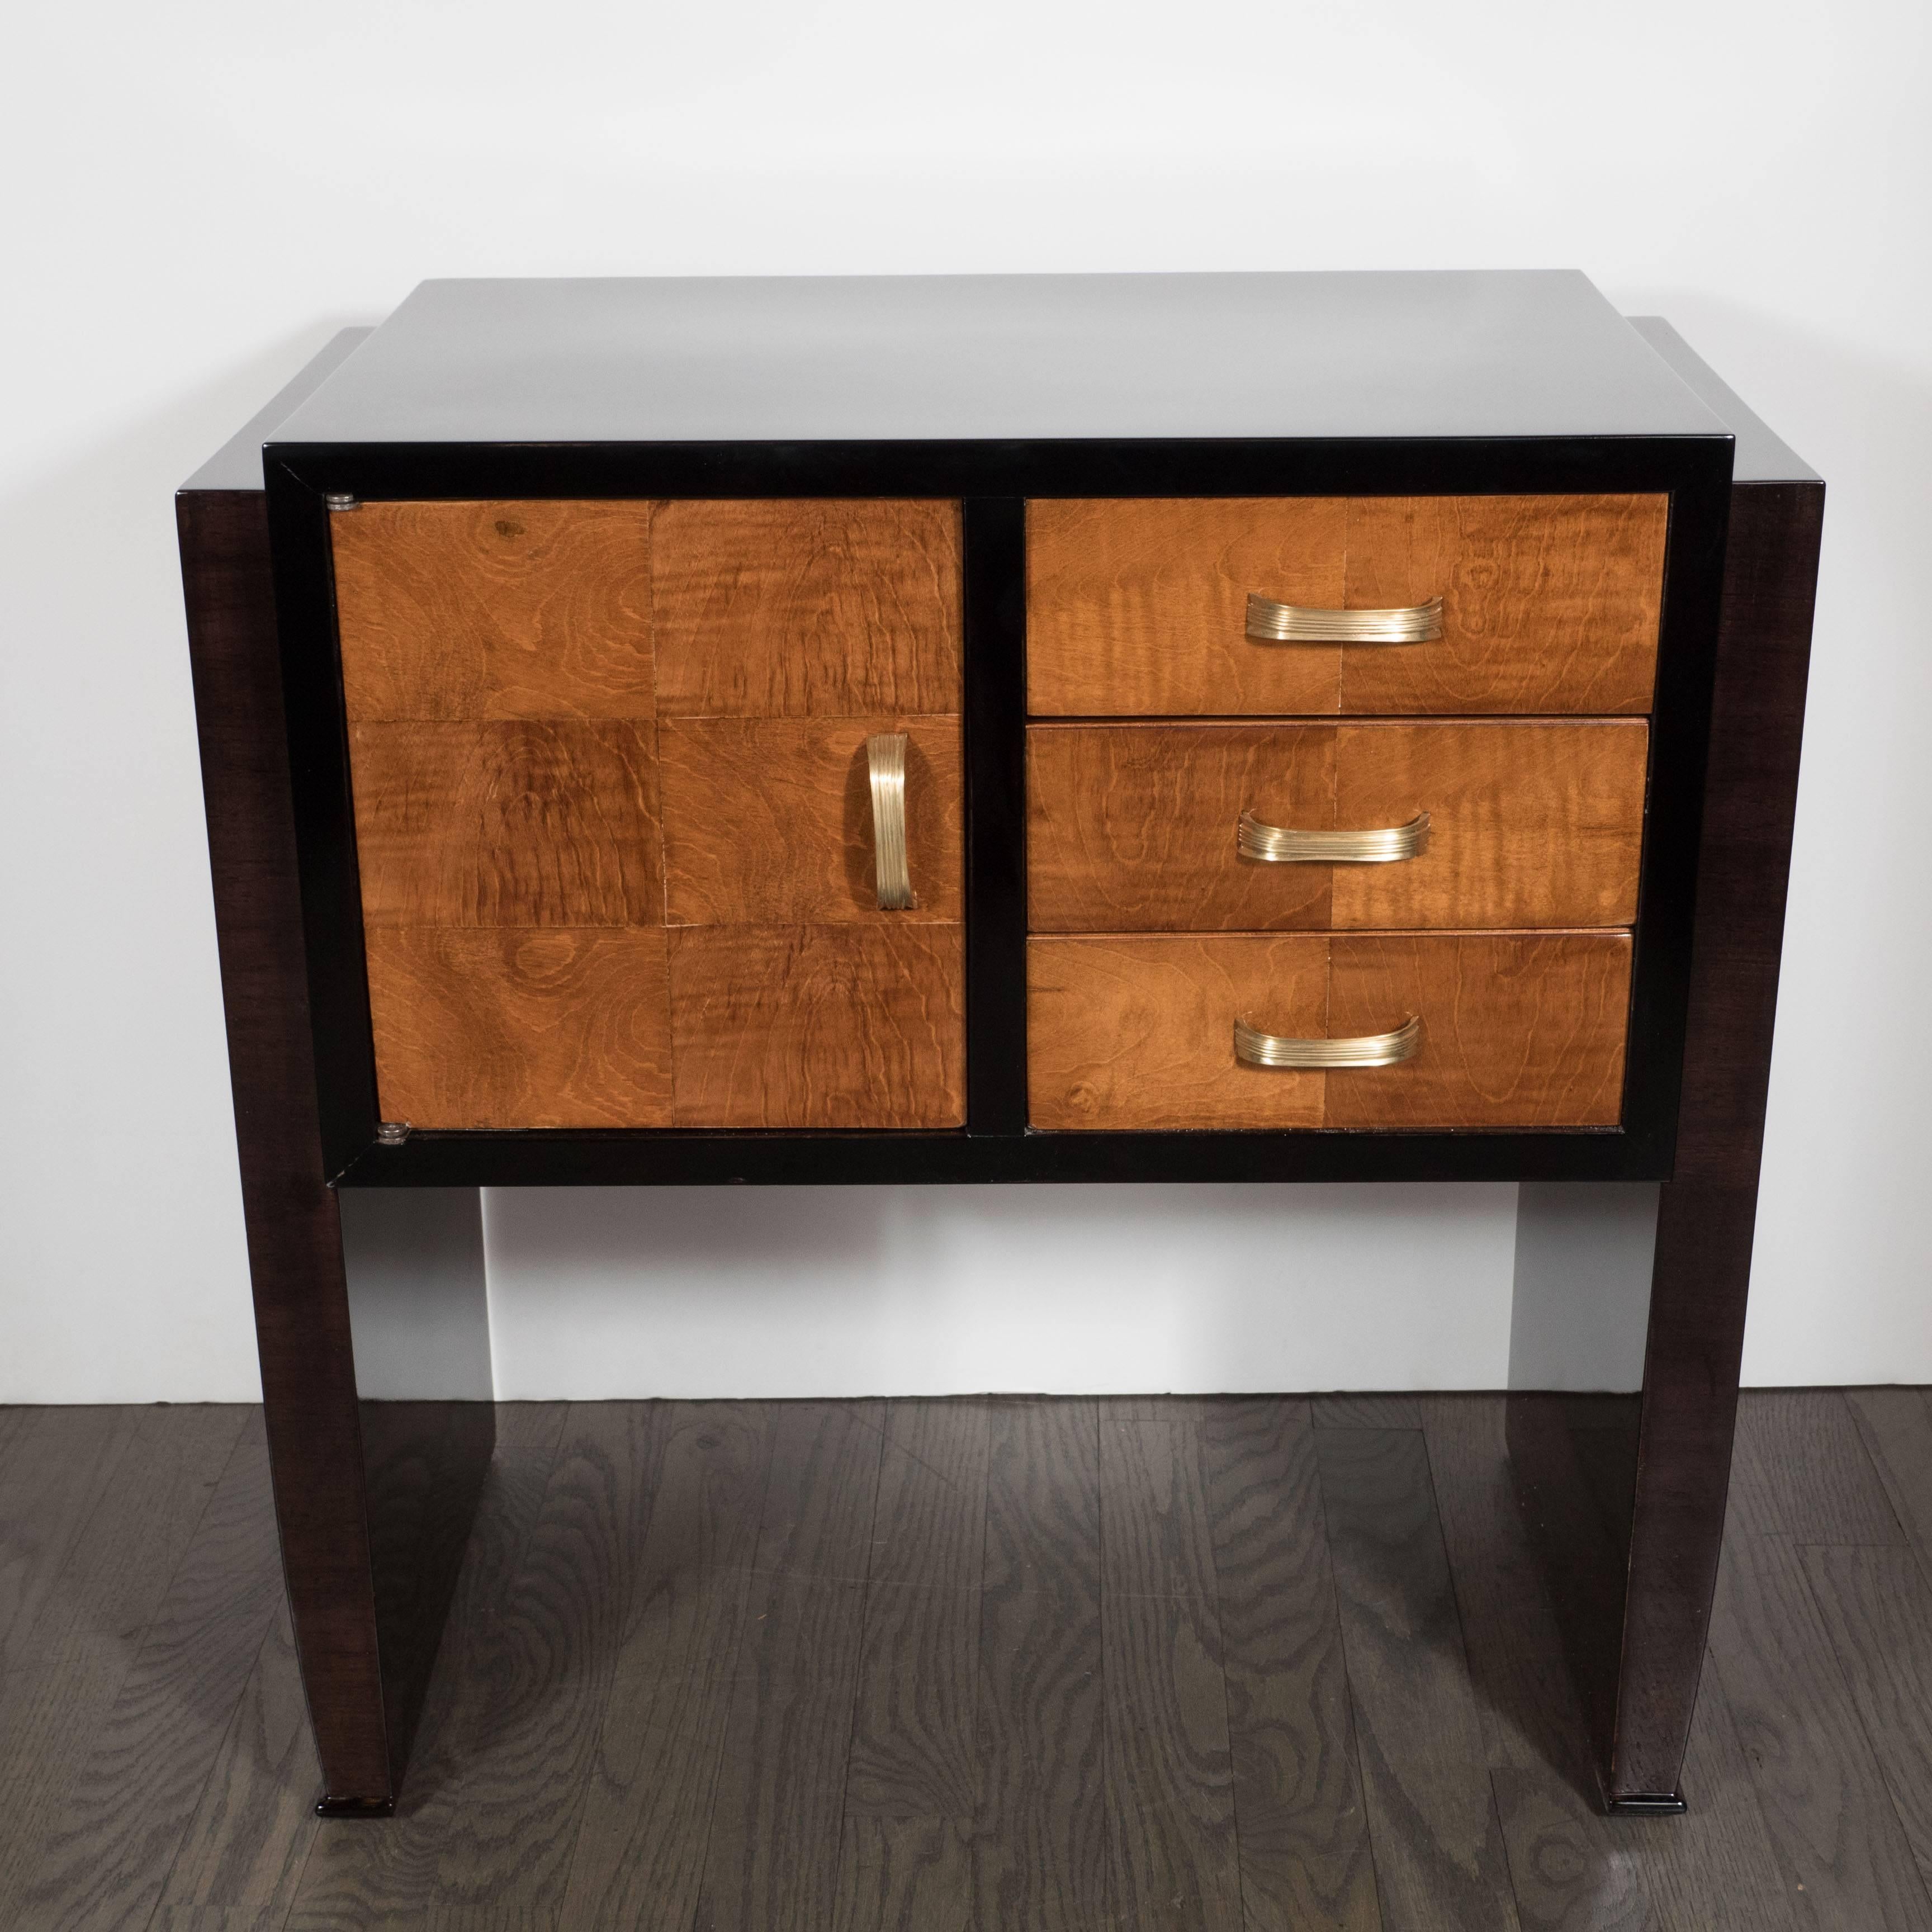 An elegant pair of Art Deco nightstands or end tables in bookmatched burled elm and ebonized walnut with streamlined brass pulls, each nightstand fitted with three drawers and one cabinet door. The drawers and cabinet doors are decorated with